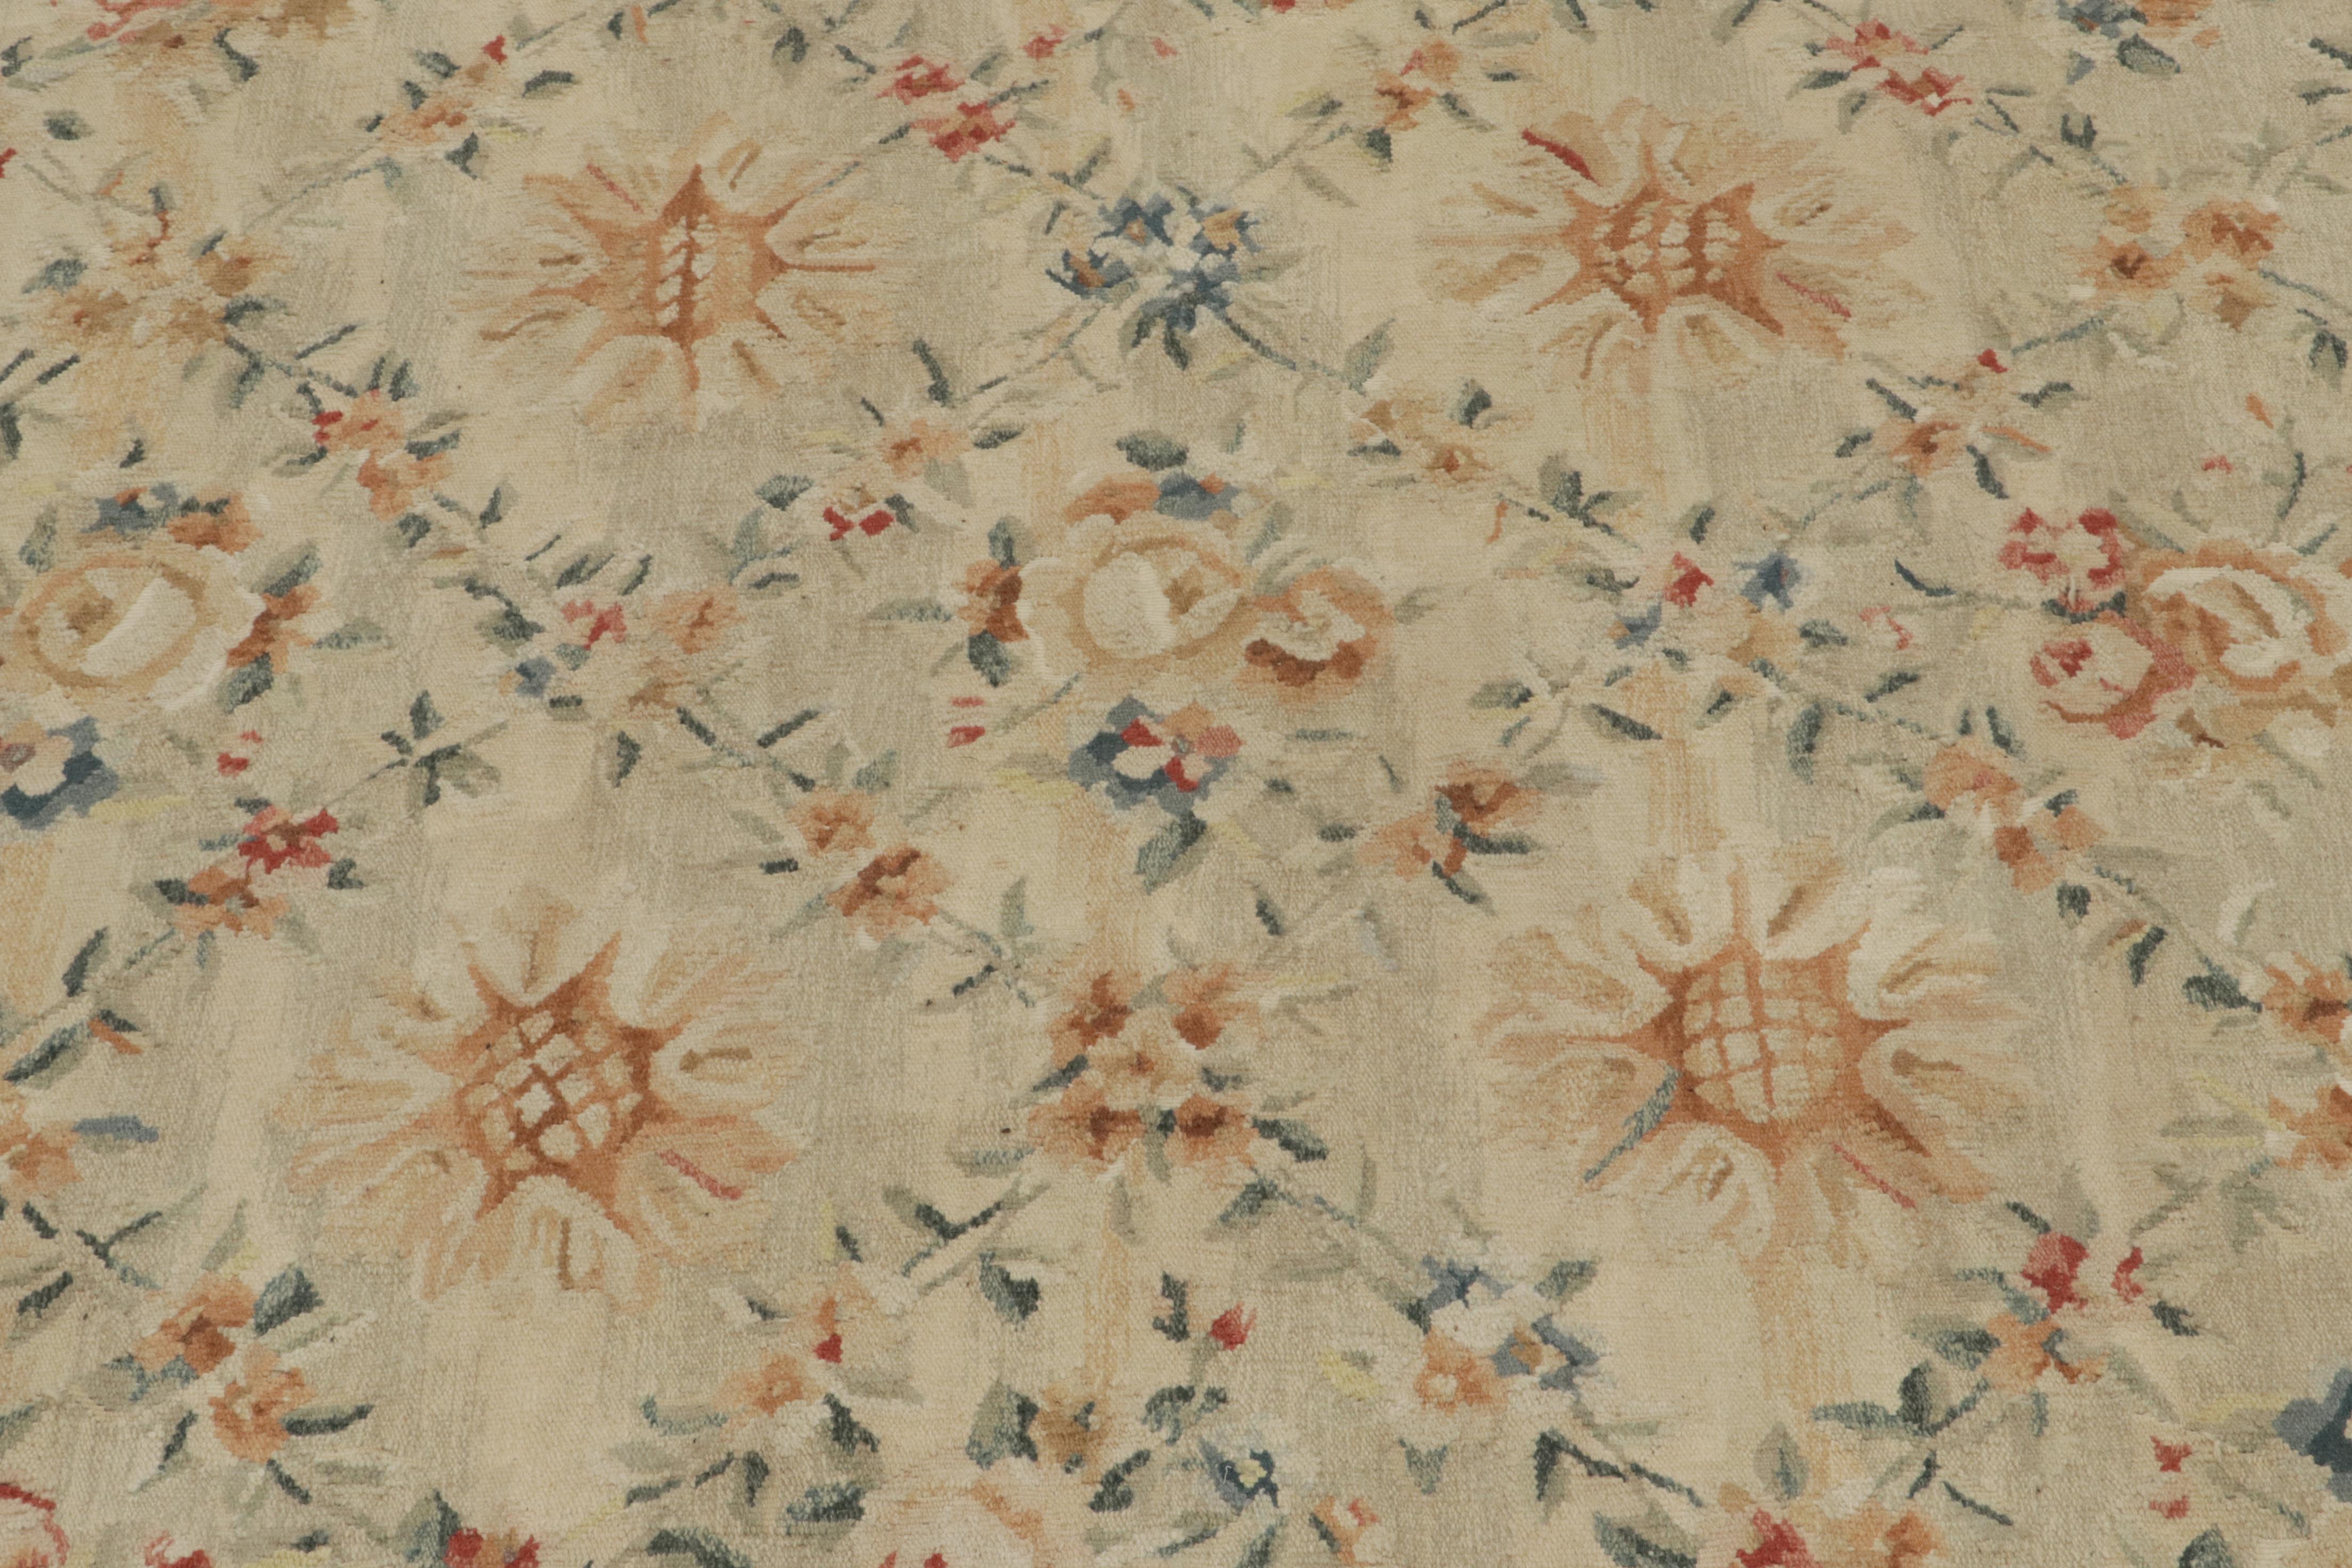 Contemporary Rug & Kilim’s Aubusson style Flat Weave in Beige, Gold, Blue Floral Pattern For Sale